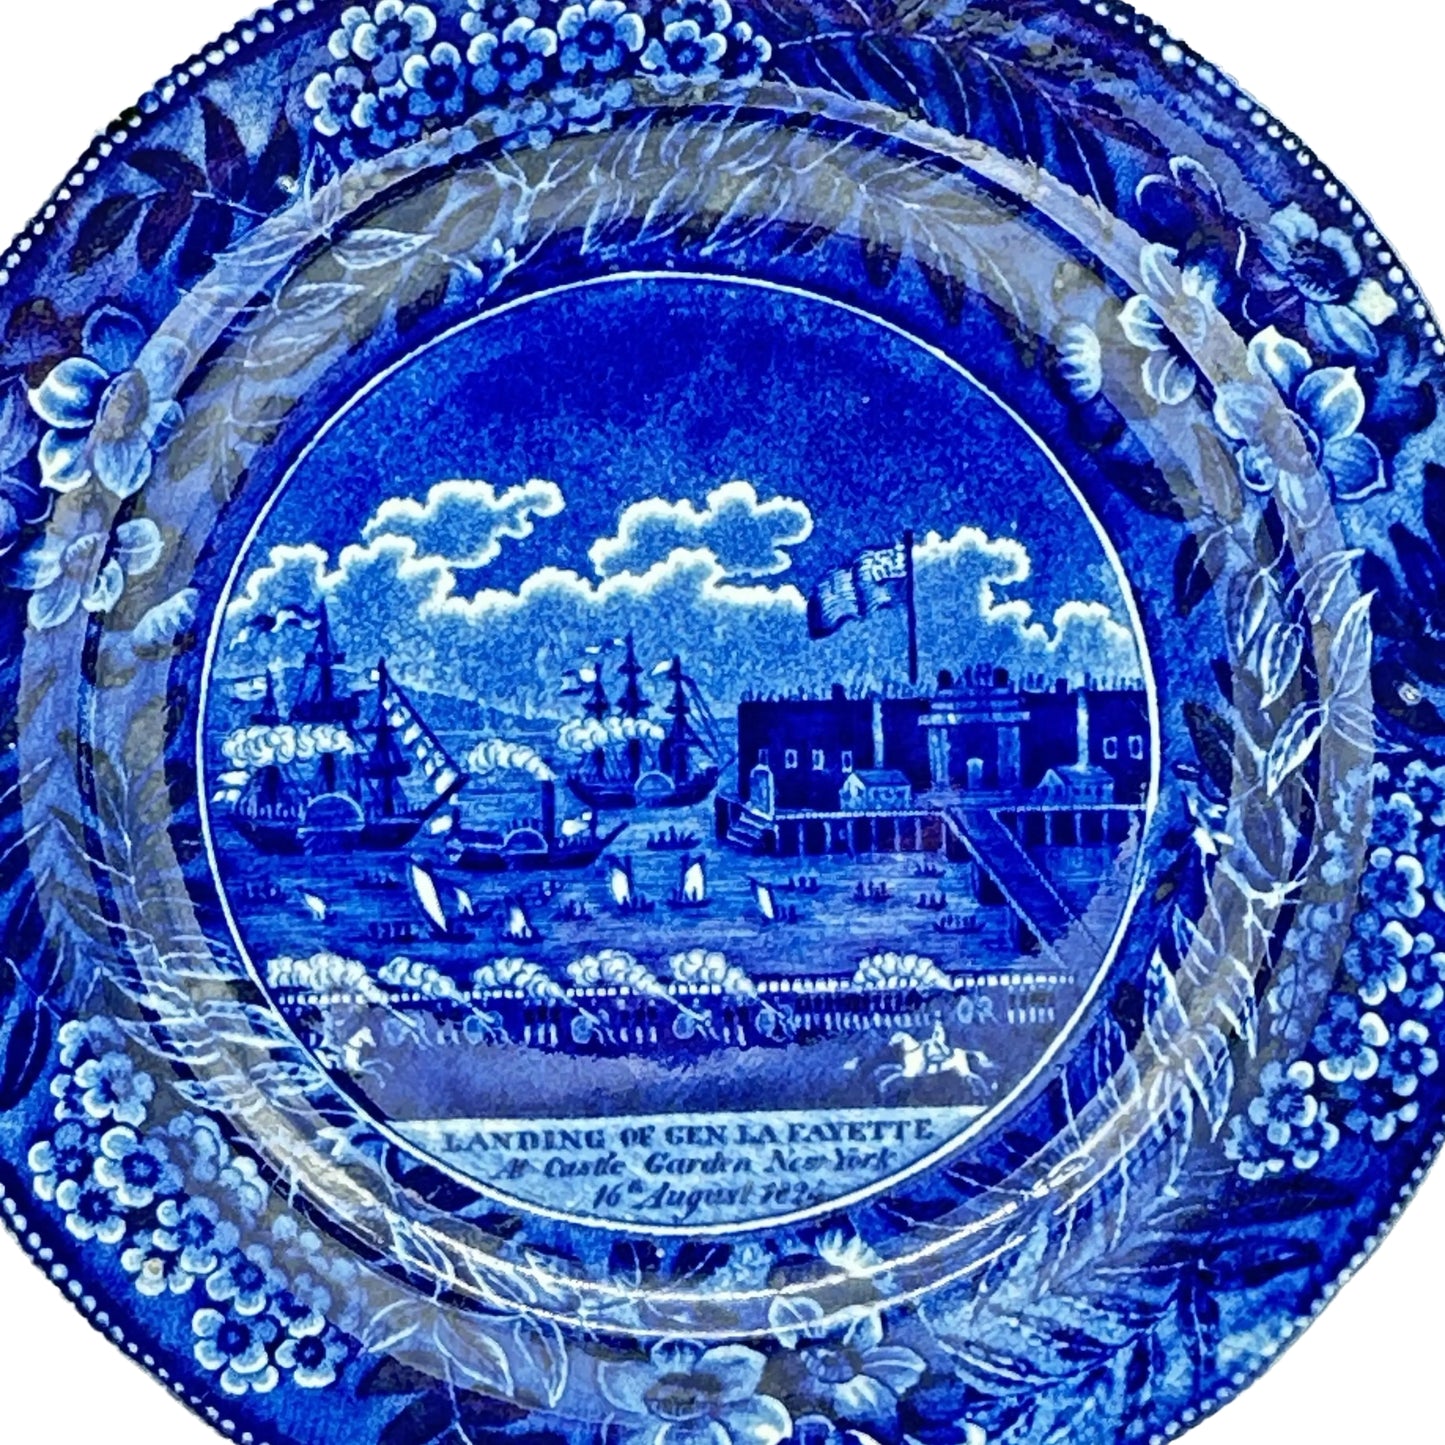 Historical Staffordshire blue plate showing the landing of Gen. Lafayette at Castle Garden in New York, early 19th c.